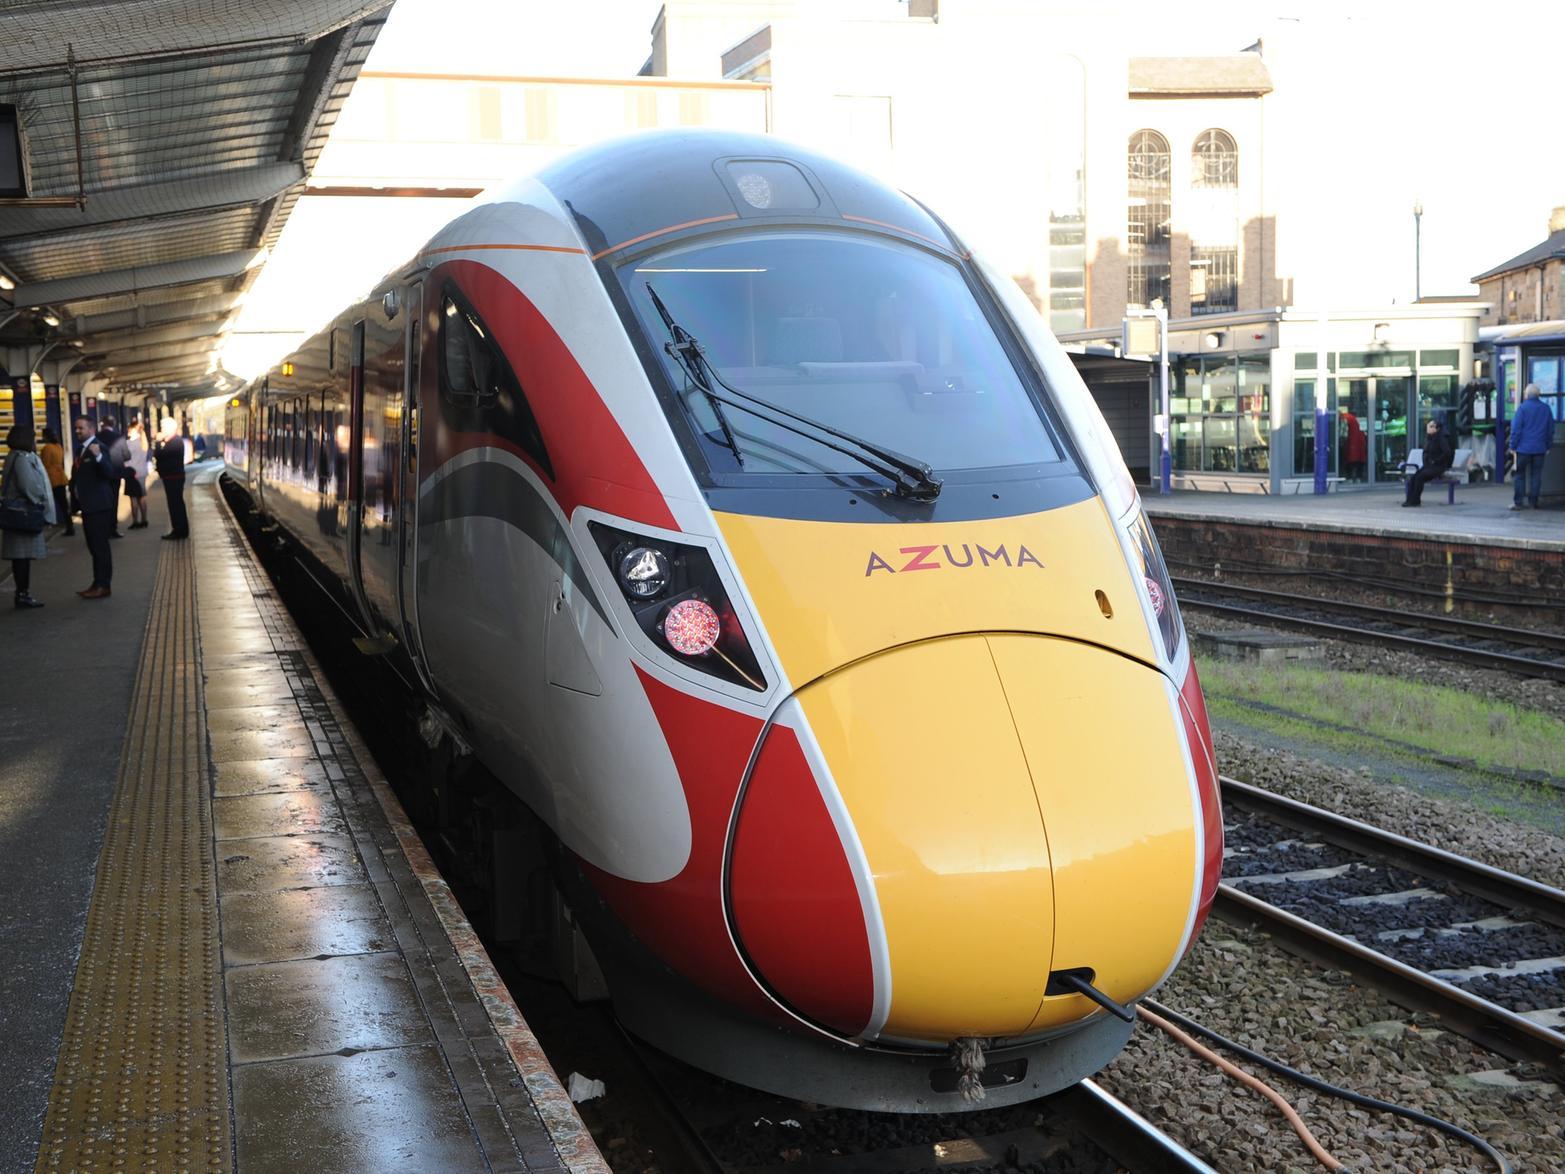 Last year saw the arrival of the new Azuma trains, which offer services to London Kings Cross directly out of Harrogate. The LNER train now sees six daily services to the Capital, straight out of our rail station - with no changes.